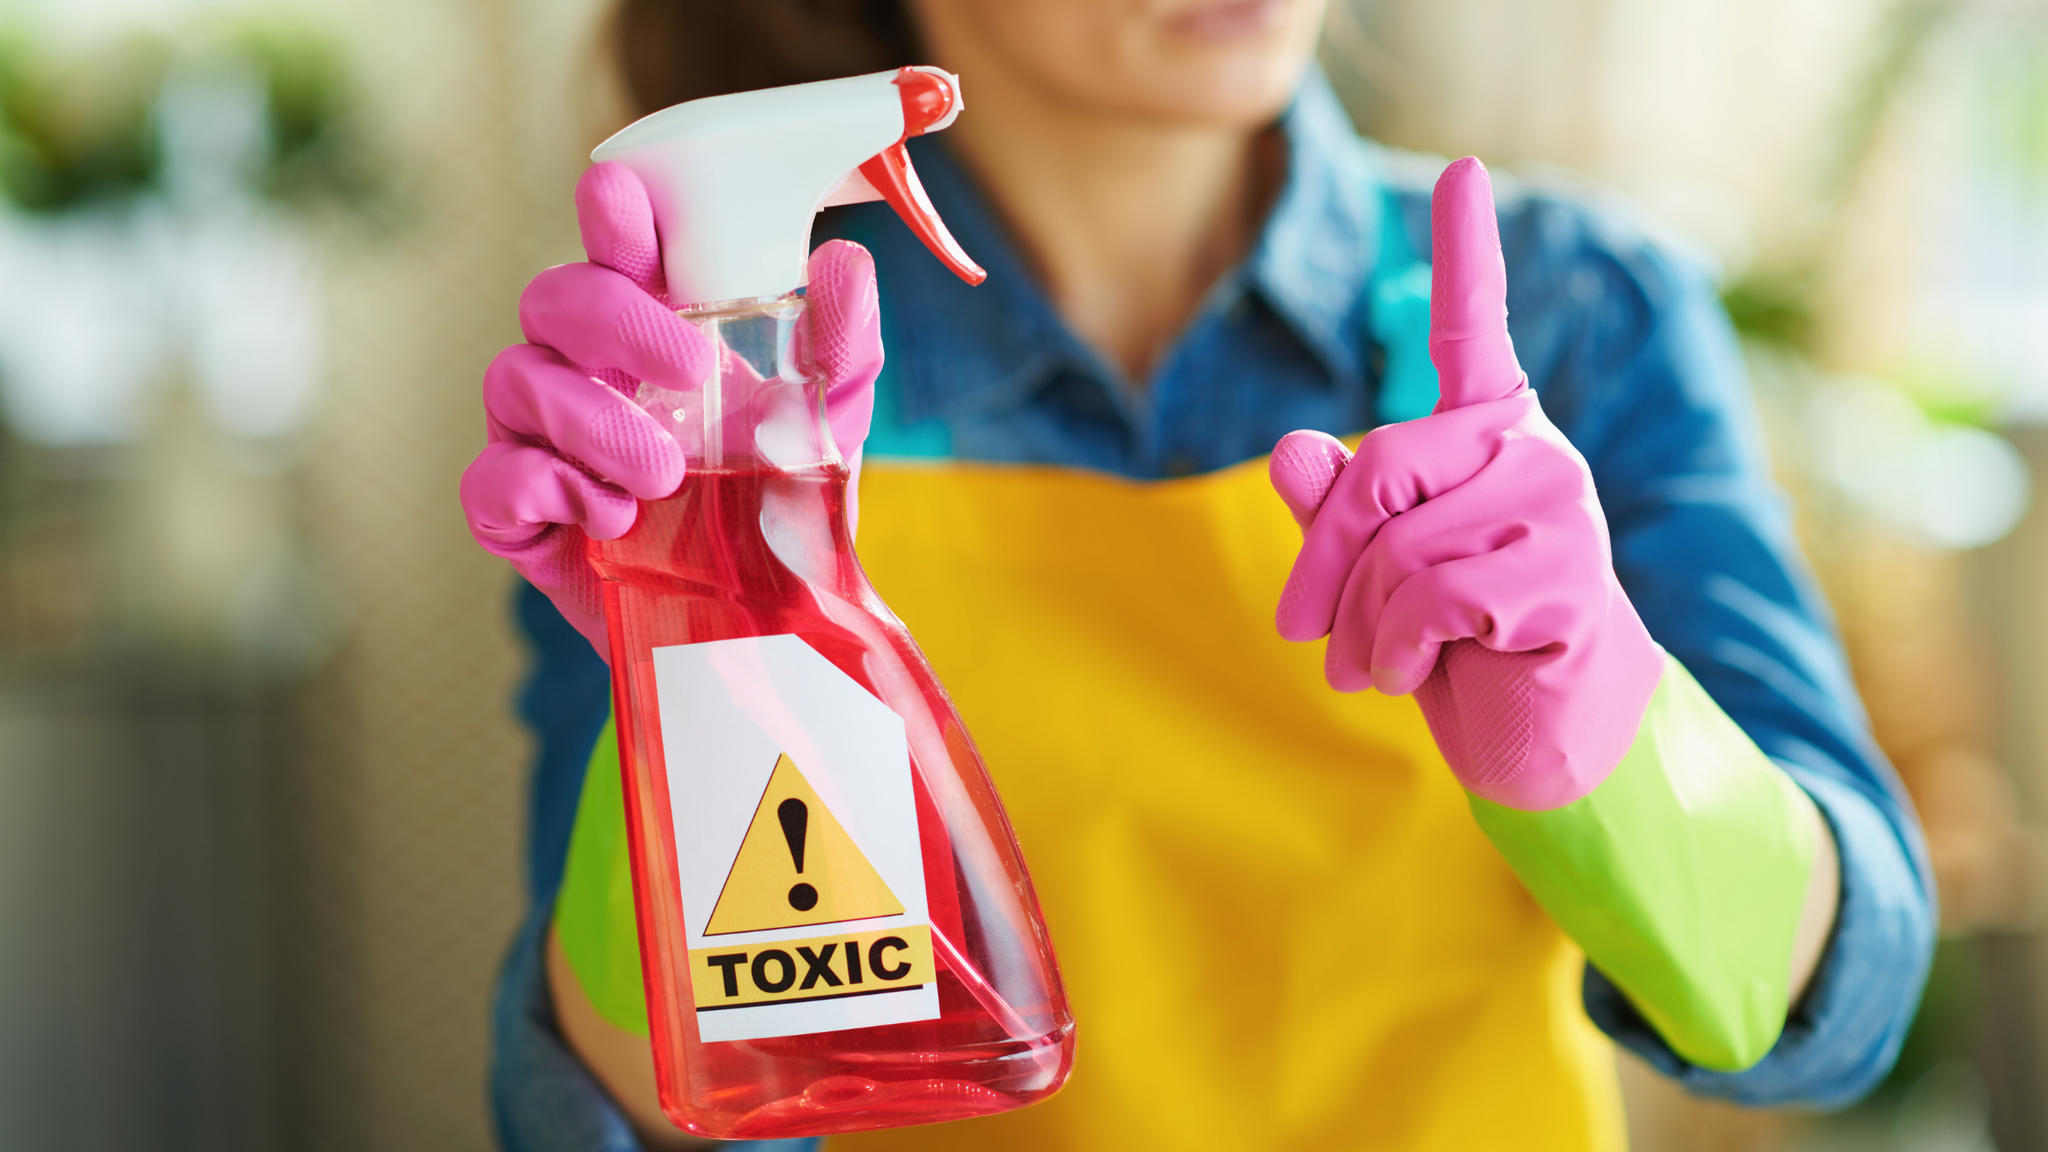 Avoid toxic cleaner and switch to non-toxic alternatives